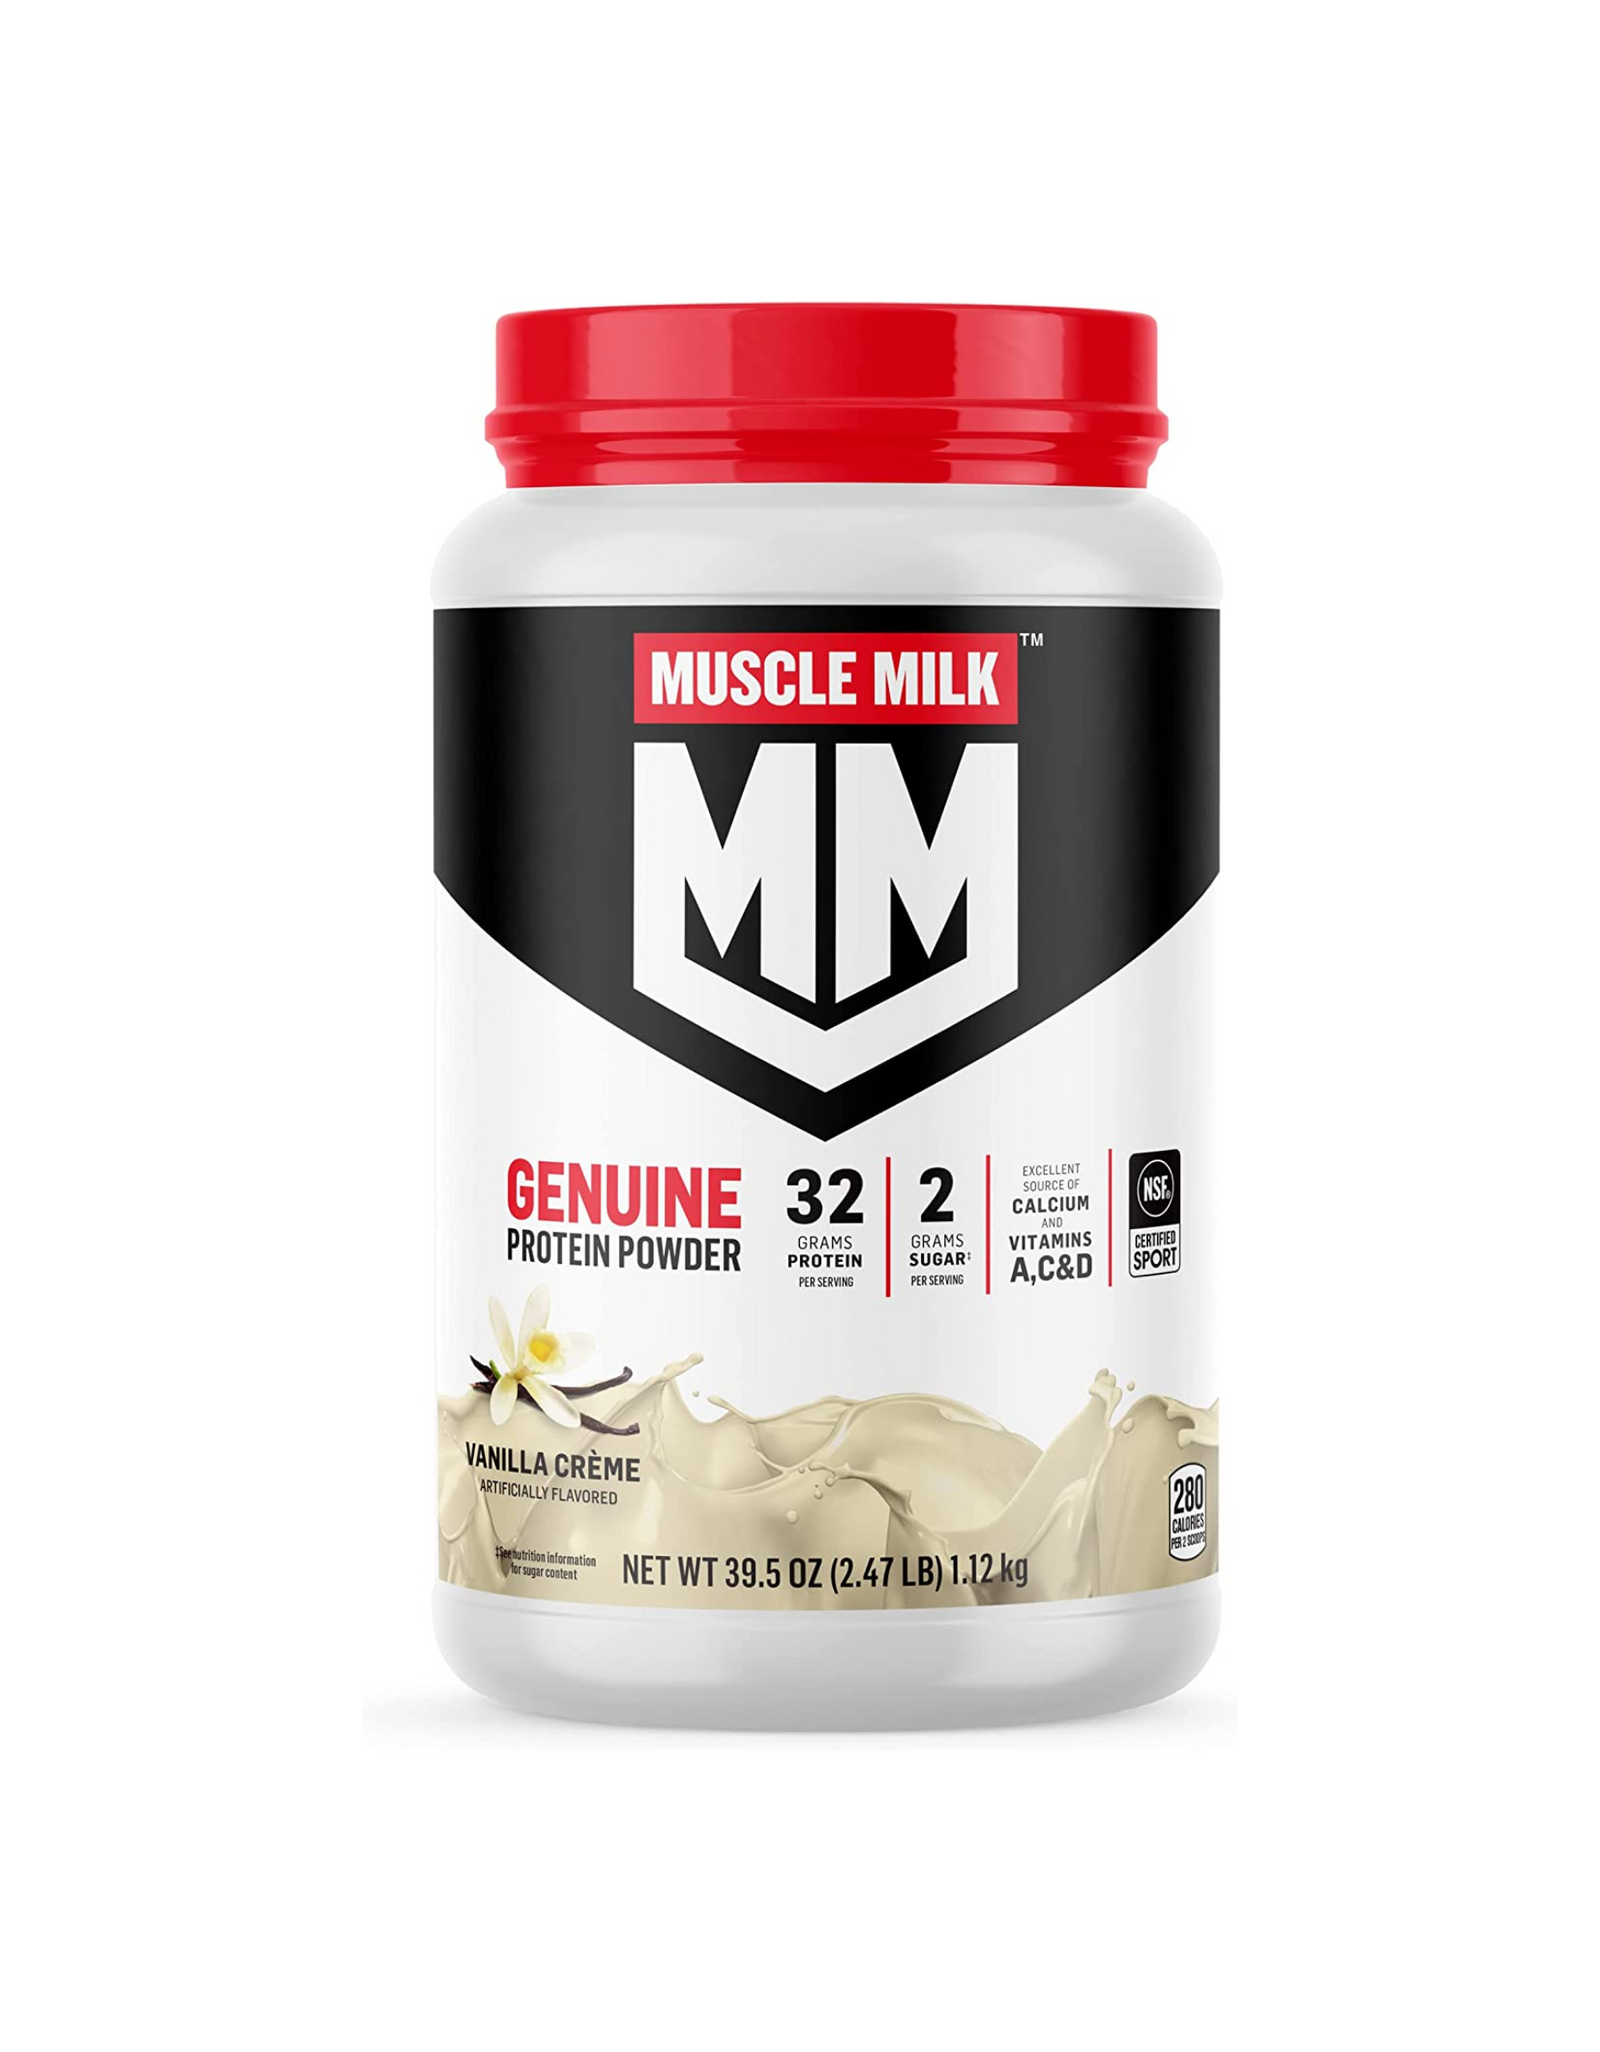 Muscle Milk Genuine Protein Powder, Vanilla Crème, 16 Servings, 32g Protein, 2g Sugar, Calcium, Vitamins A, C & D, 2.47 lbs. (Packaging May Vary)